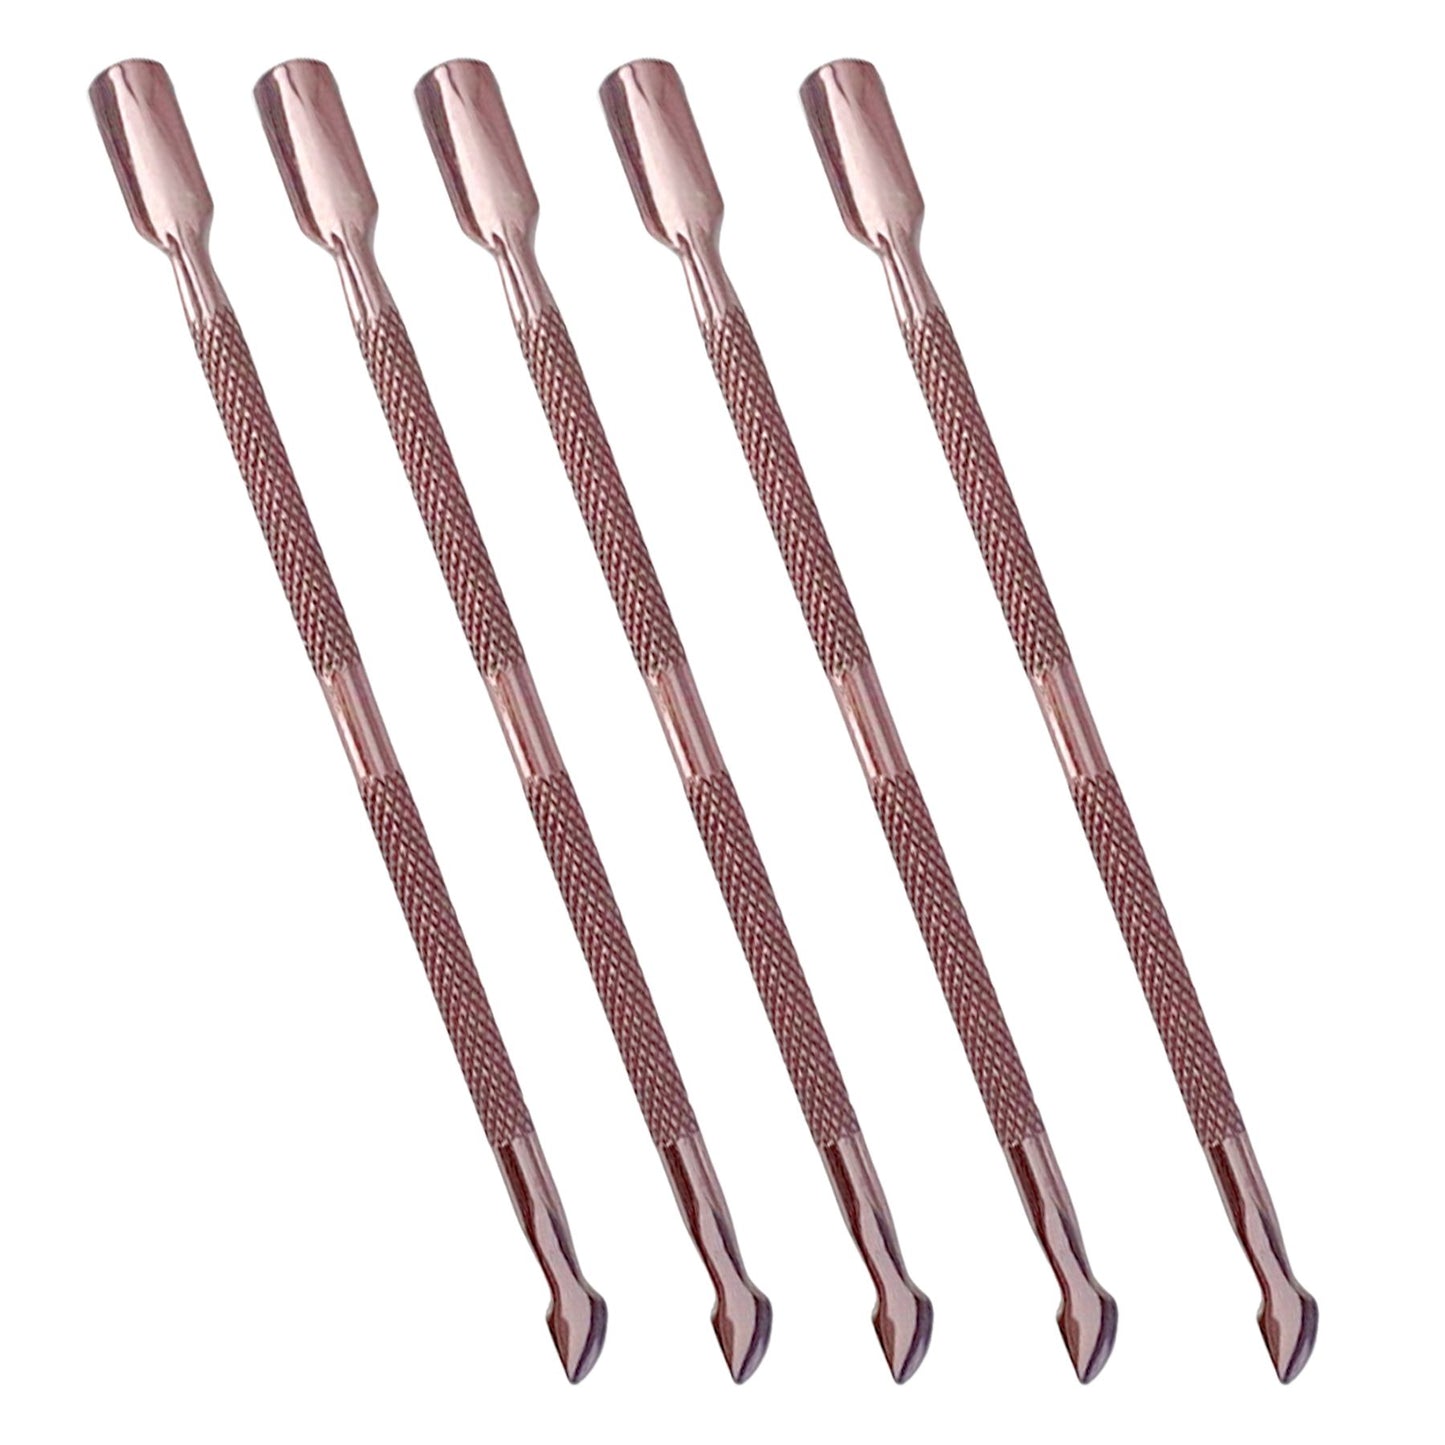 5 Pack Sistaco Manicure Tool